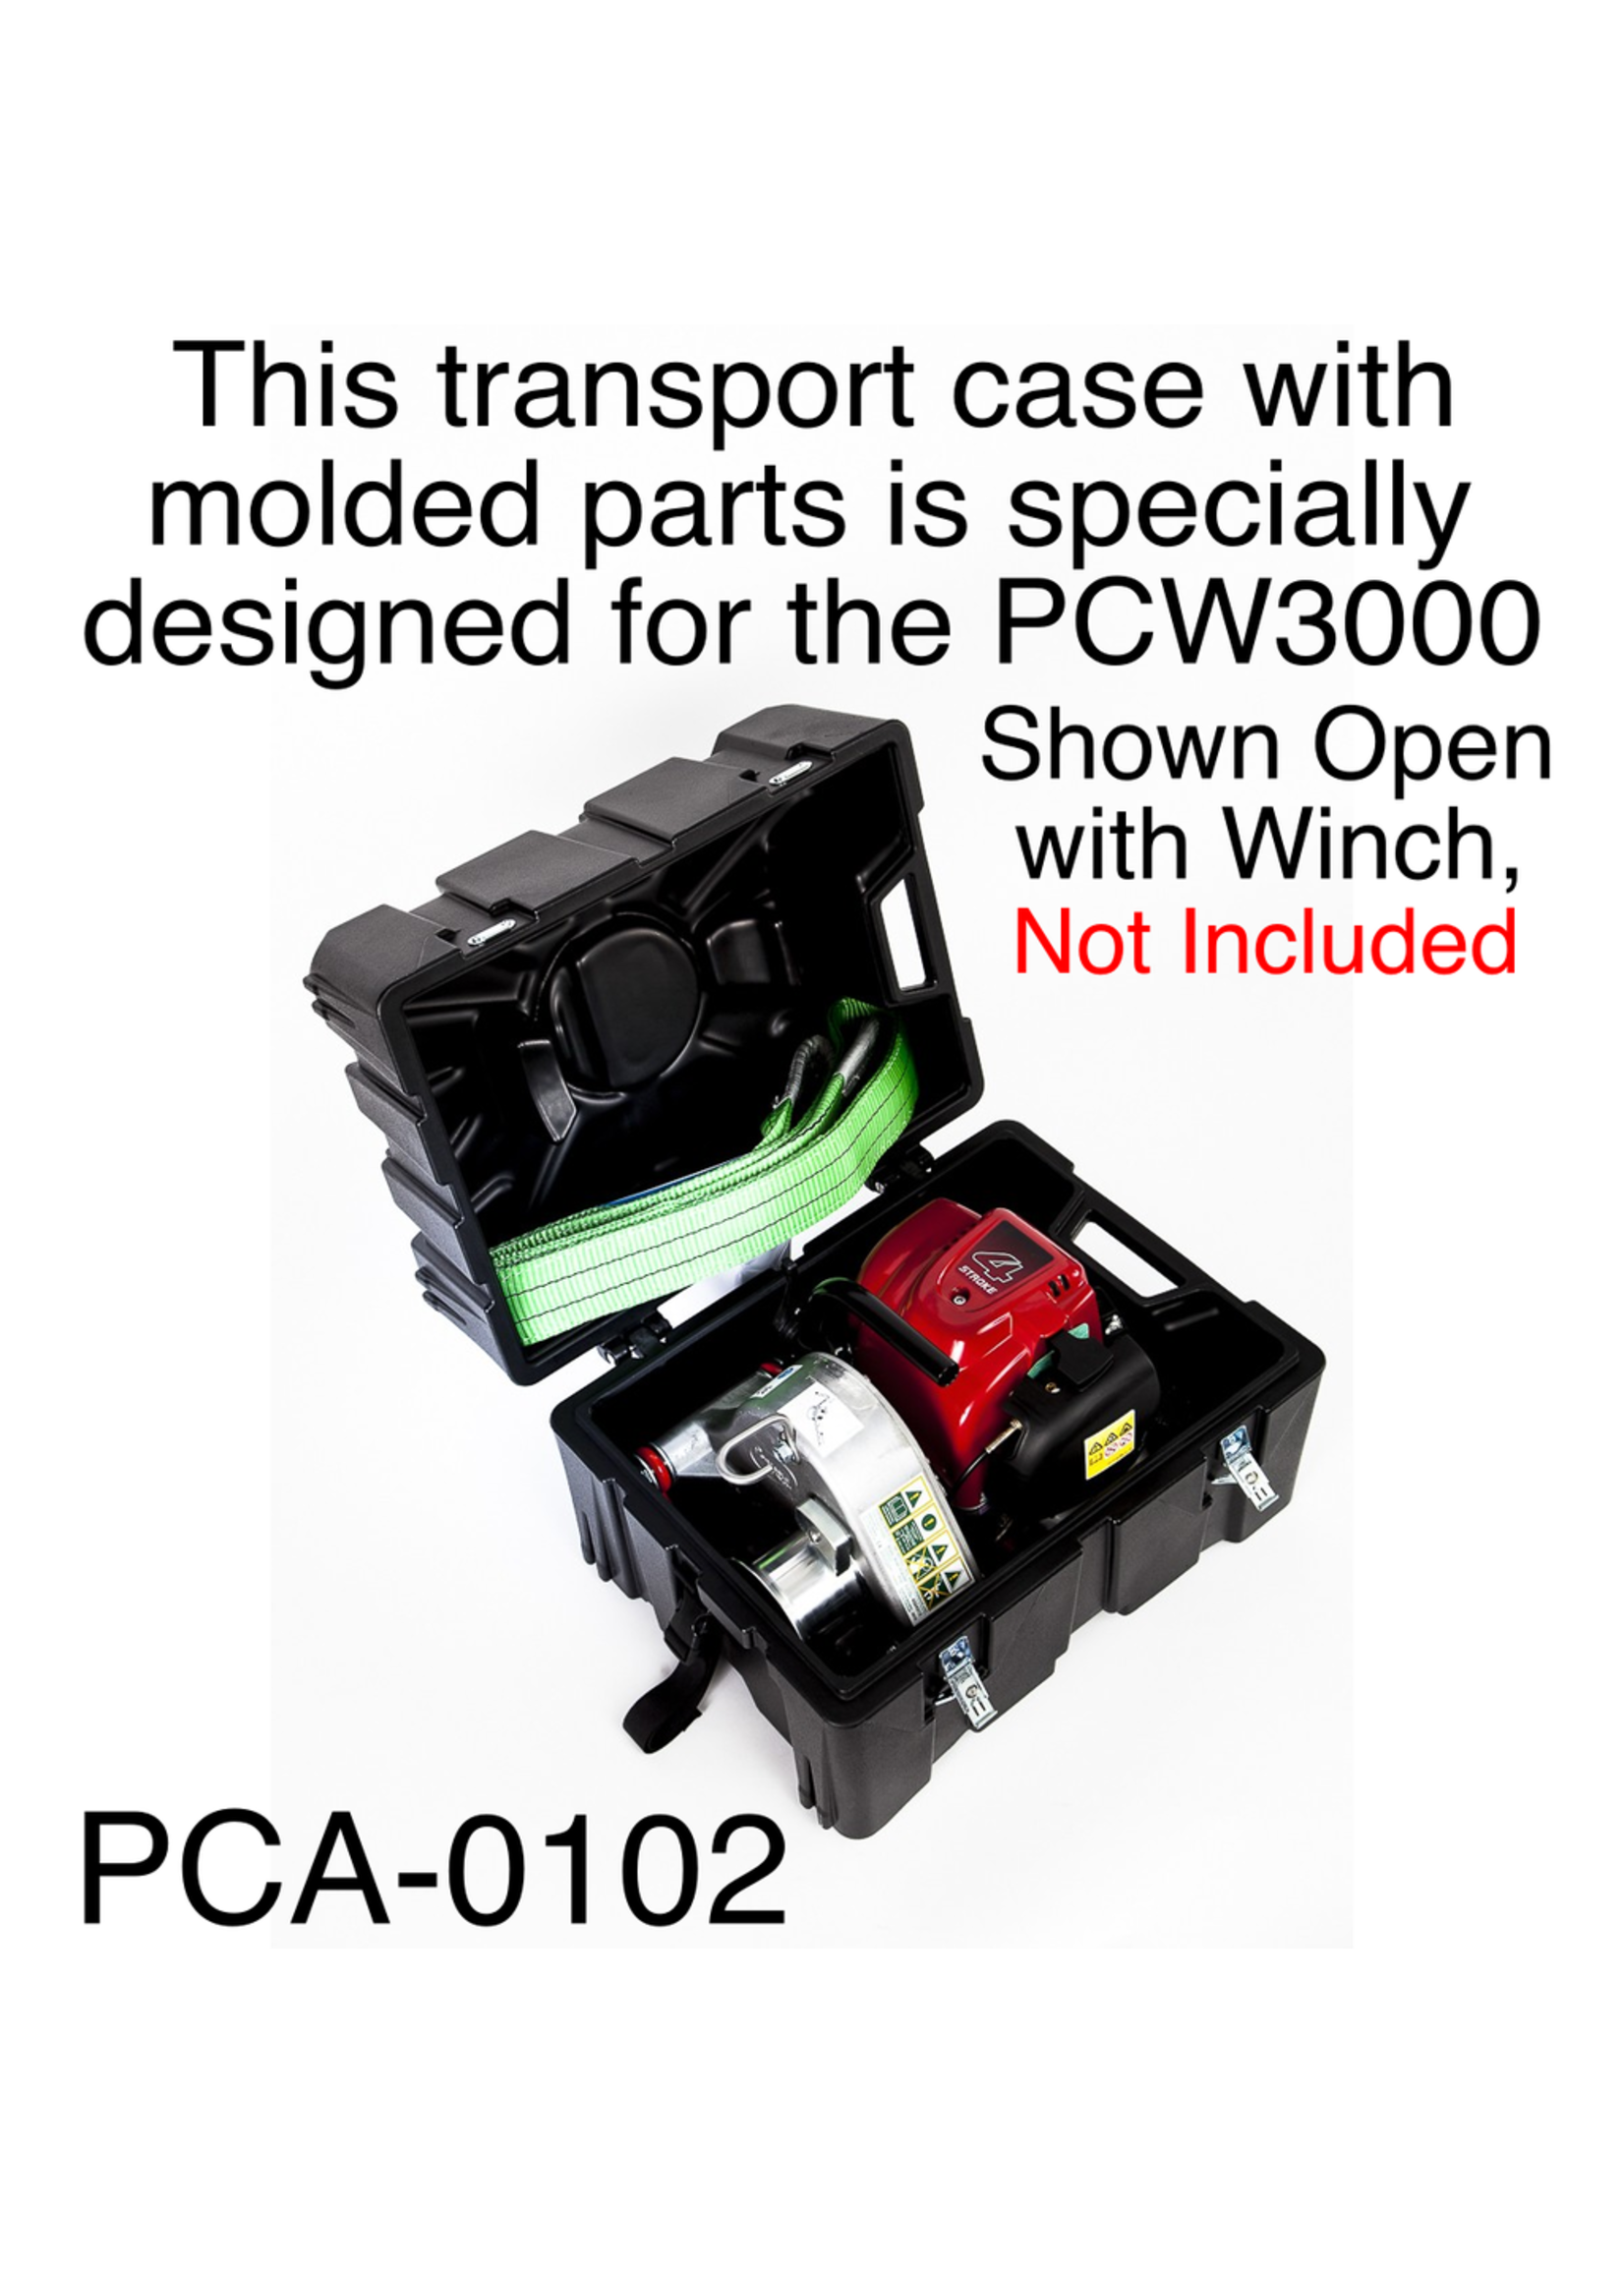 PORTABLE WINCH CO. Transport Case with Molded Parts, Specially Designed for the PCW3000 Winch